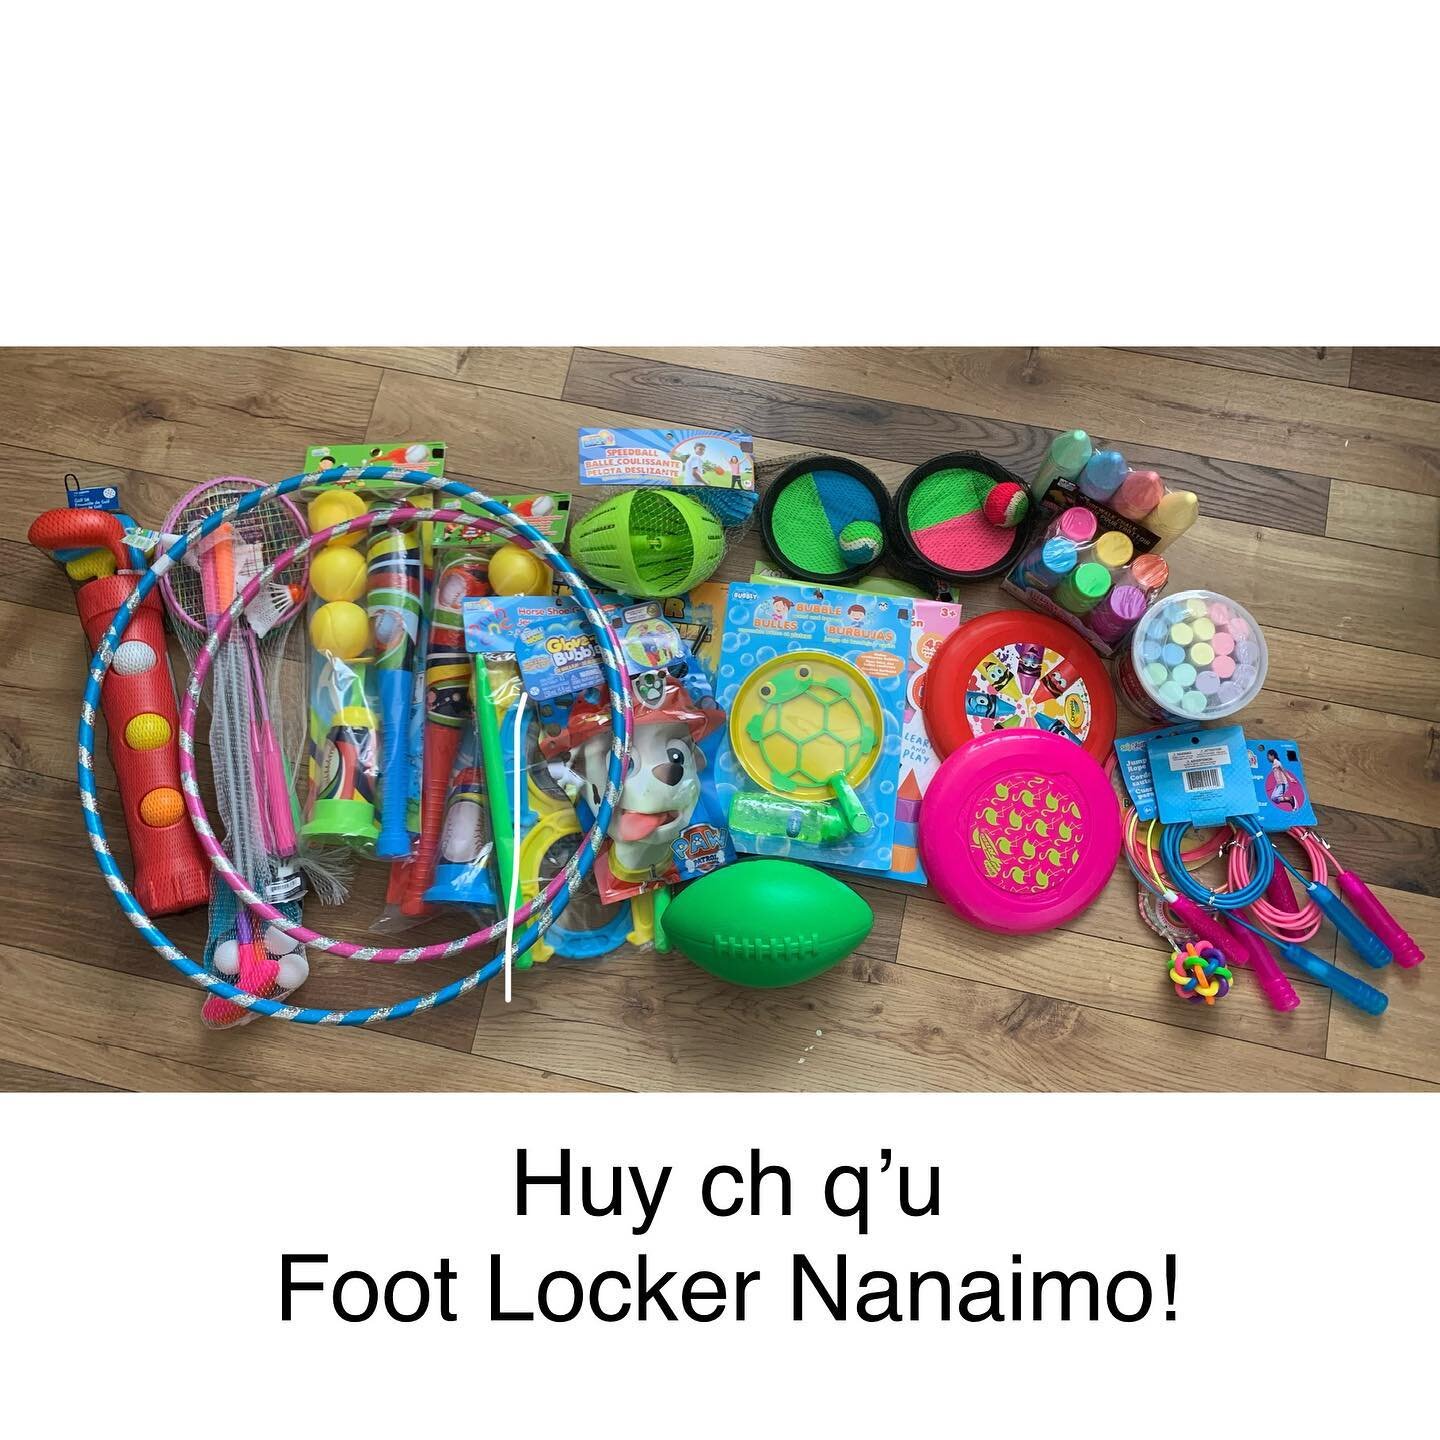 We would like to send a big THANK YOU to the Foot Locker Nanaimo team for their generous donations today! As the sun comes out, the children staying at Cedar Woman House are set to enjoy the outdoors with all of these awesome toys. On top of that, Fo